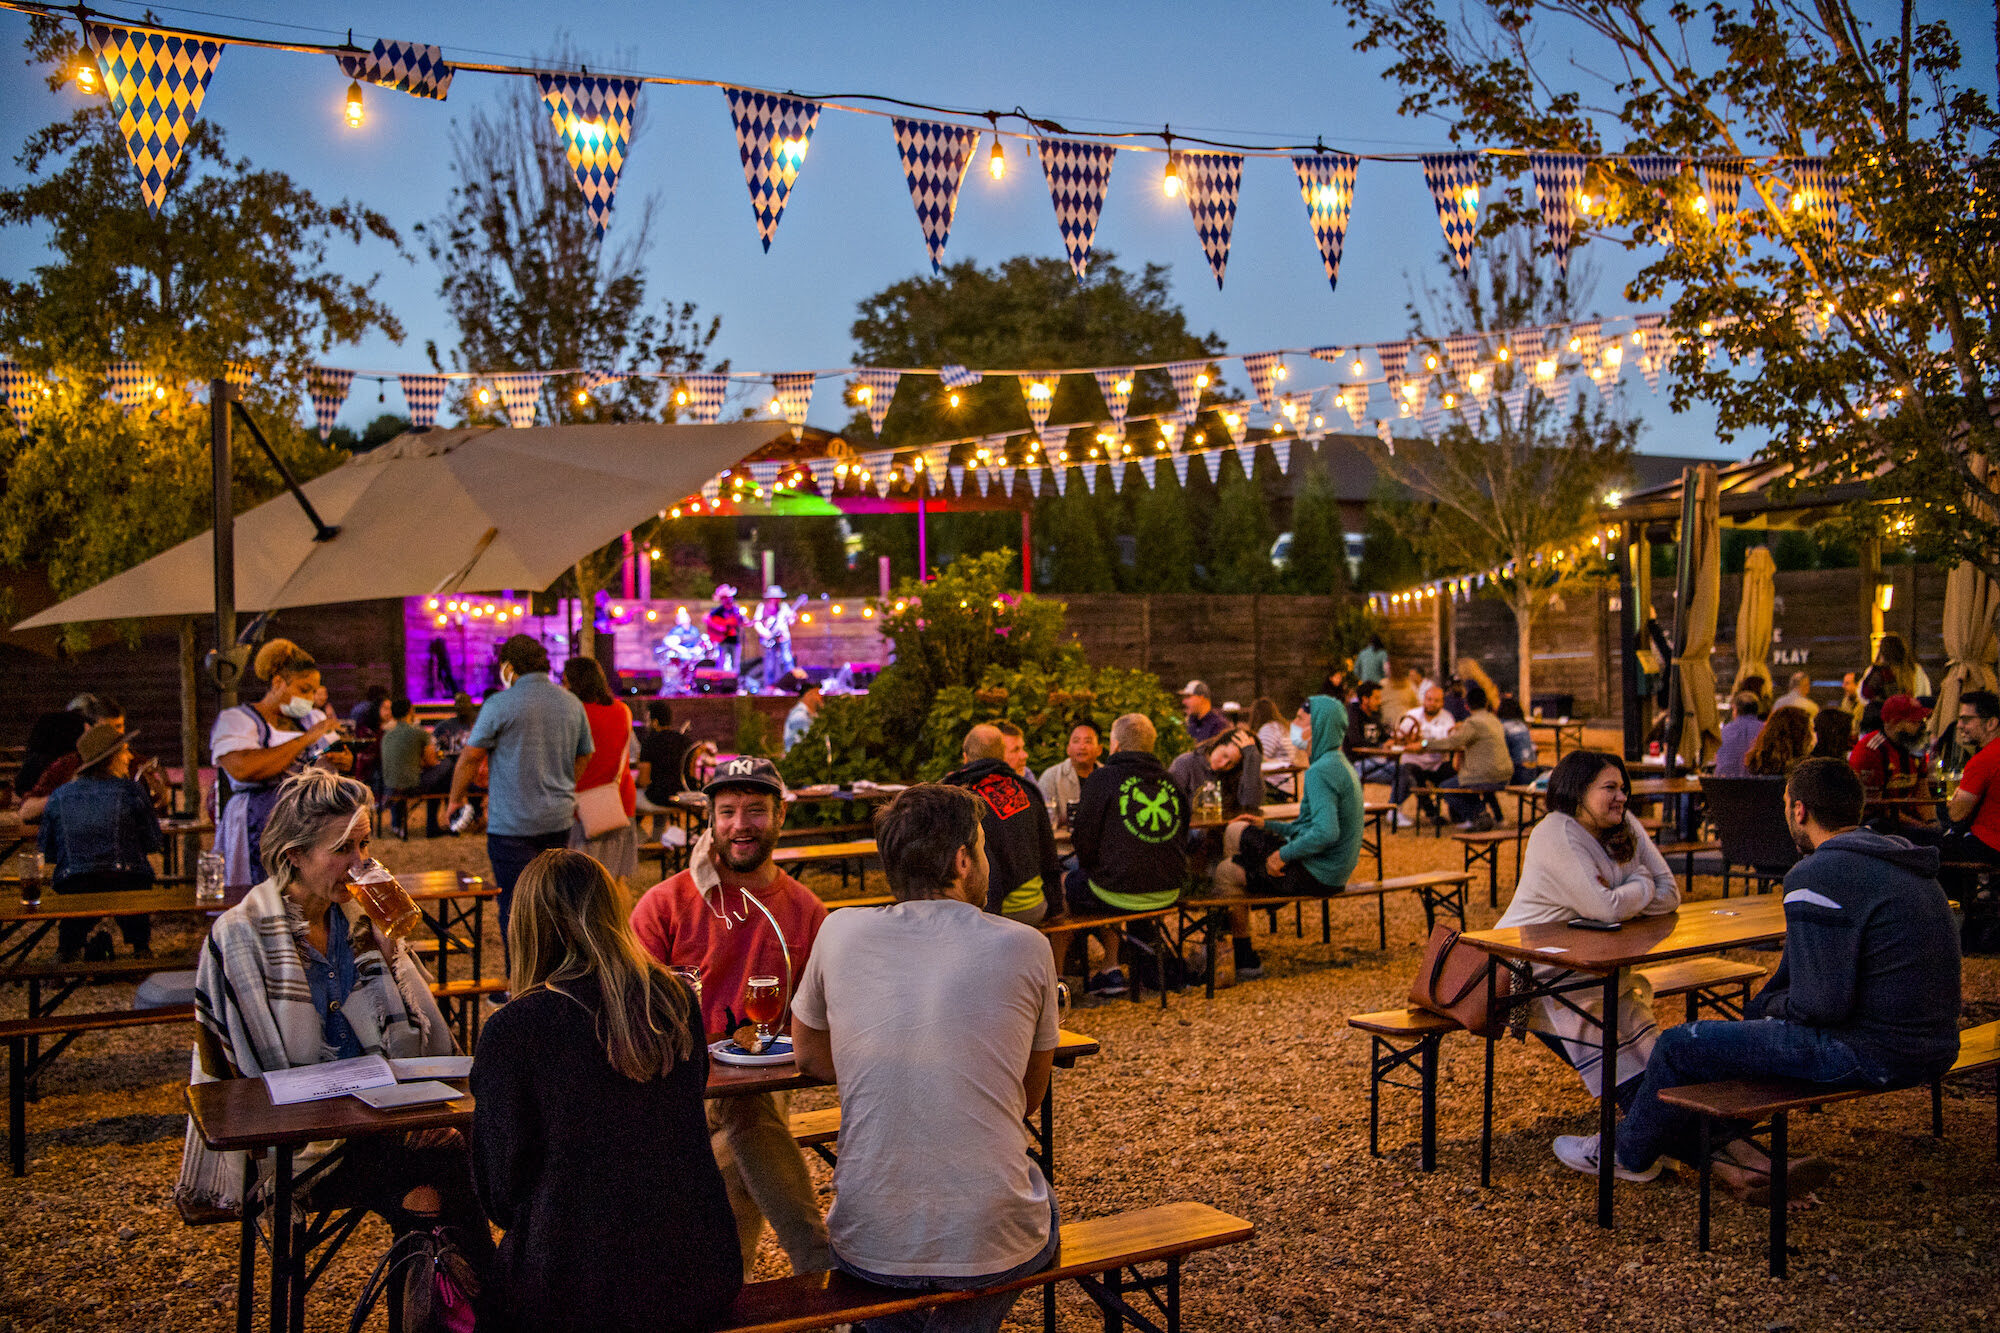 Tucker Brewing Company named one of the 10 best beer gardens in the U.S.